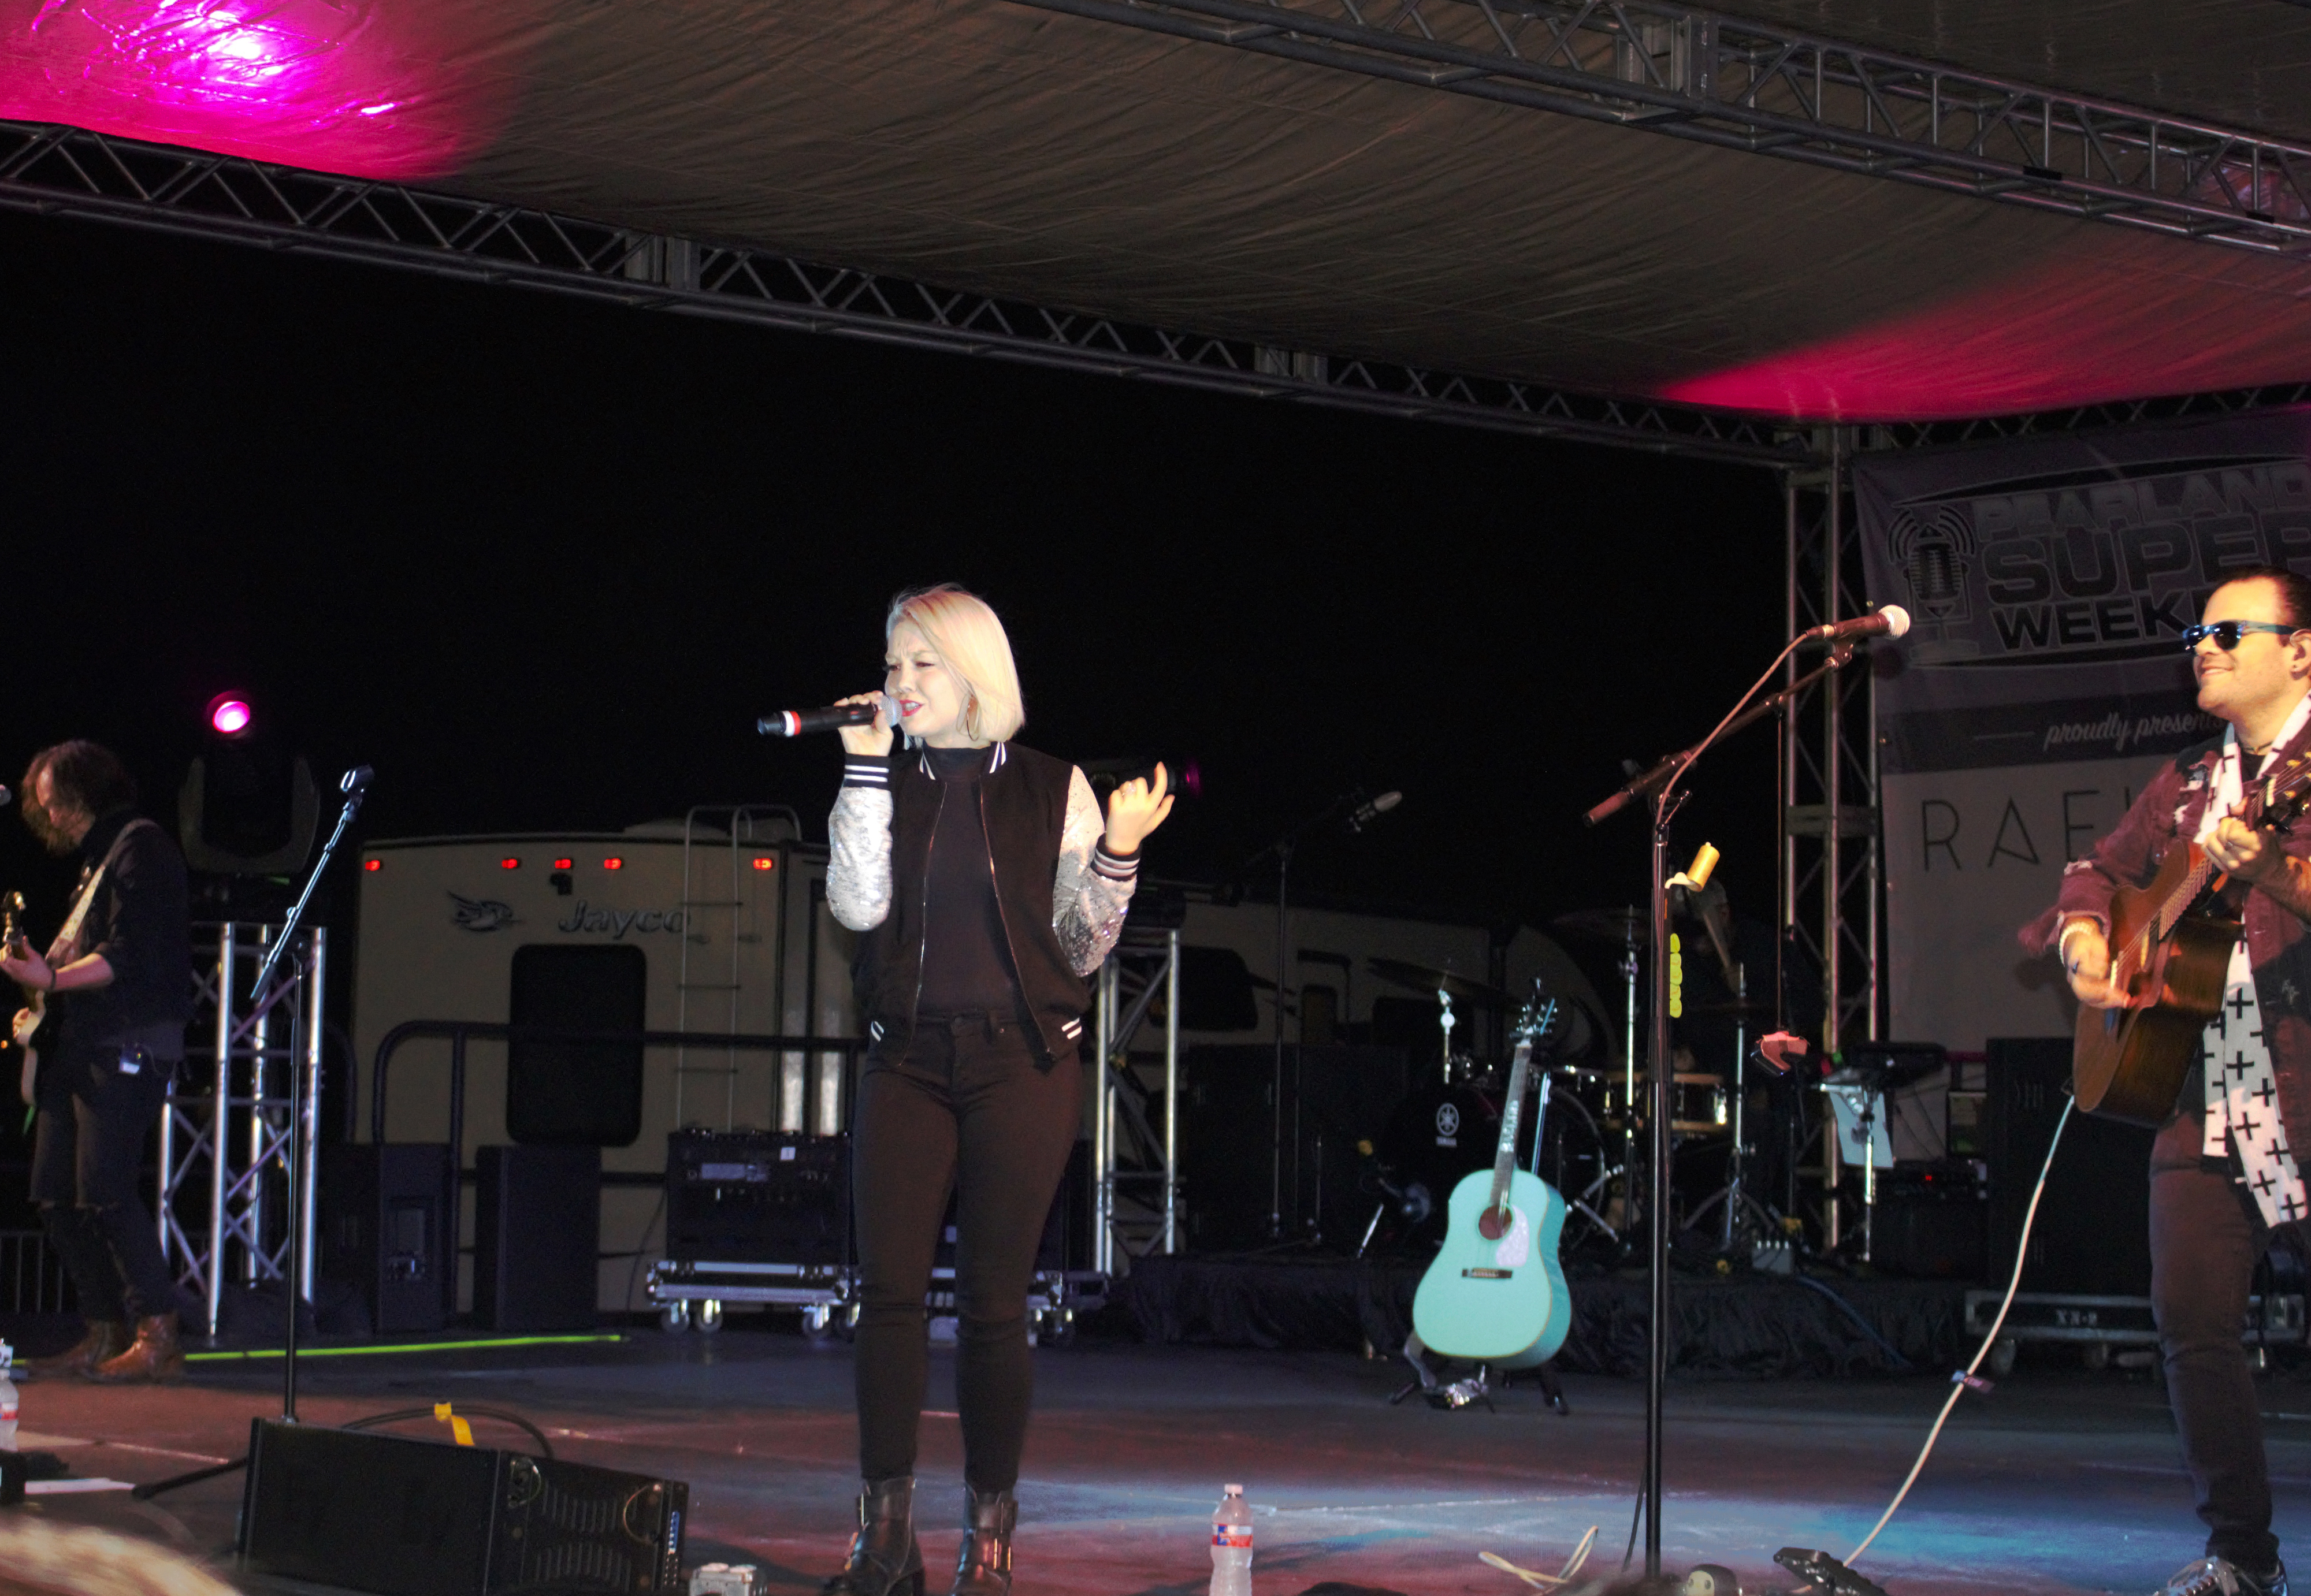 PHOTO: Rae Lynn singing "Better Do It" at Pearland Super Weekend Feb. 4, 2017. Photo by The Signal reporter Isaly Flores.